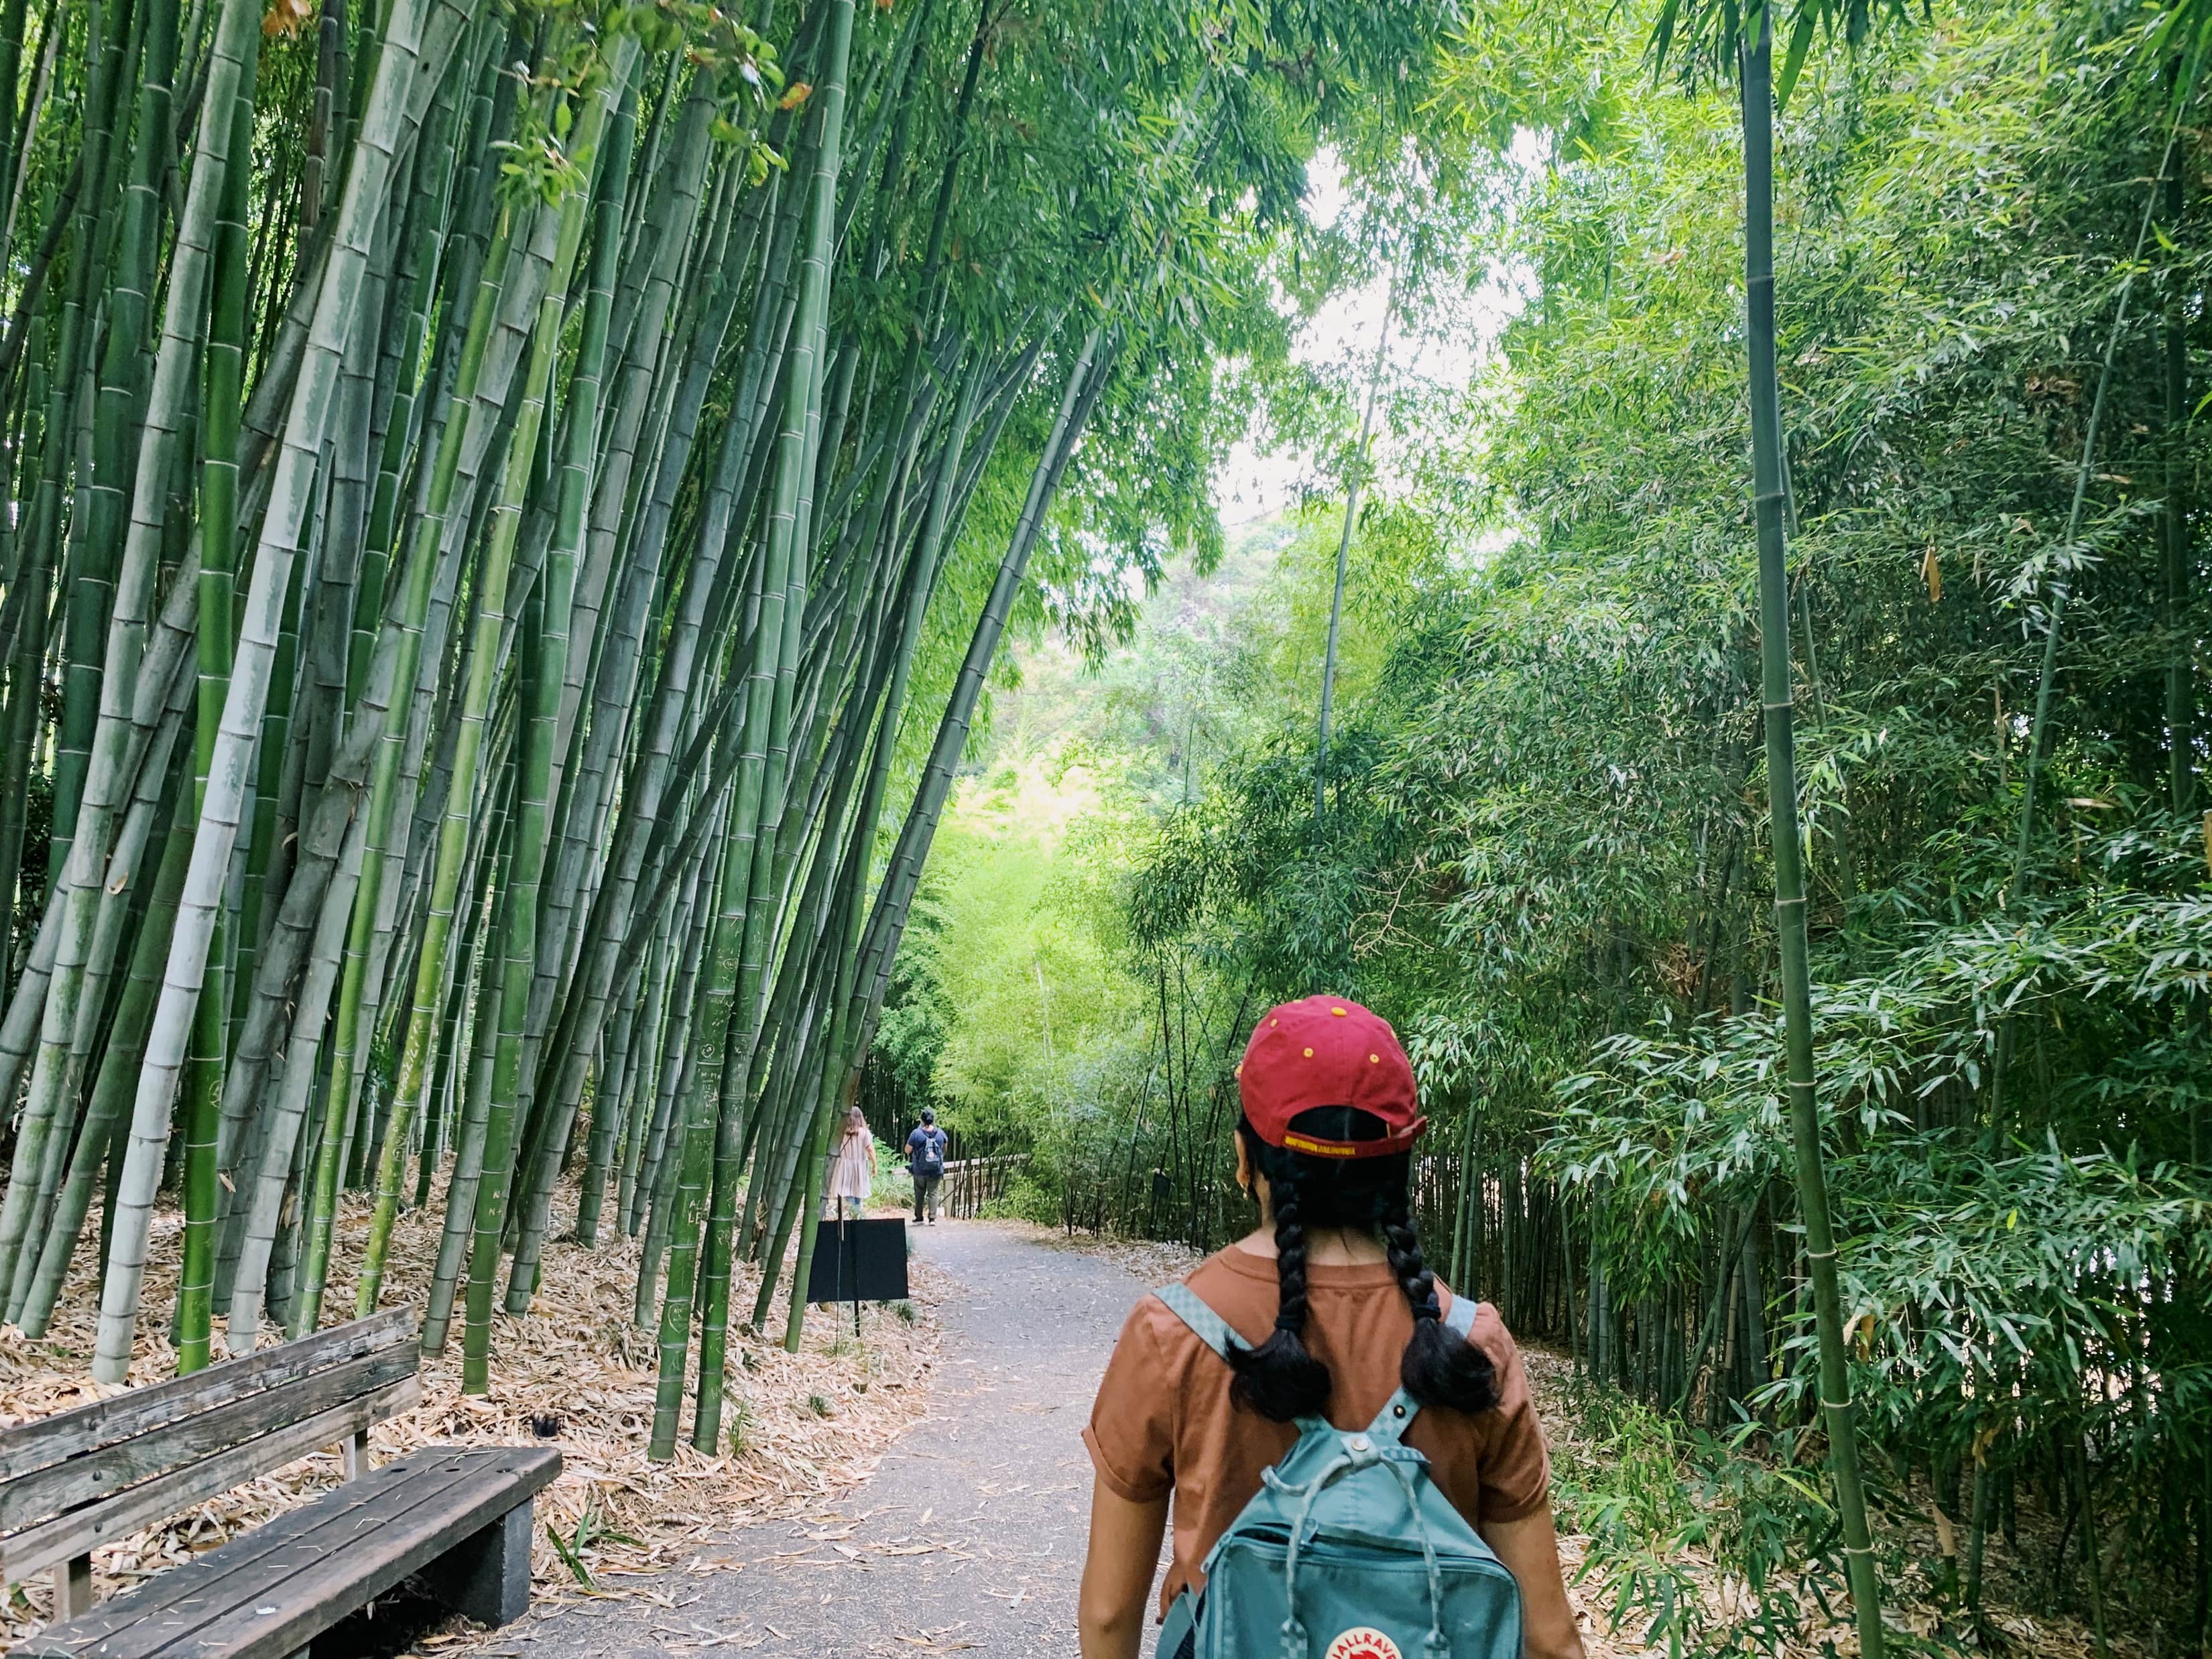 Person walking through bamboo forest